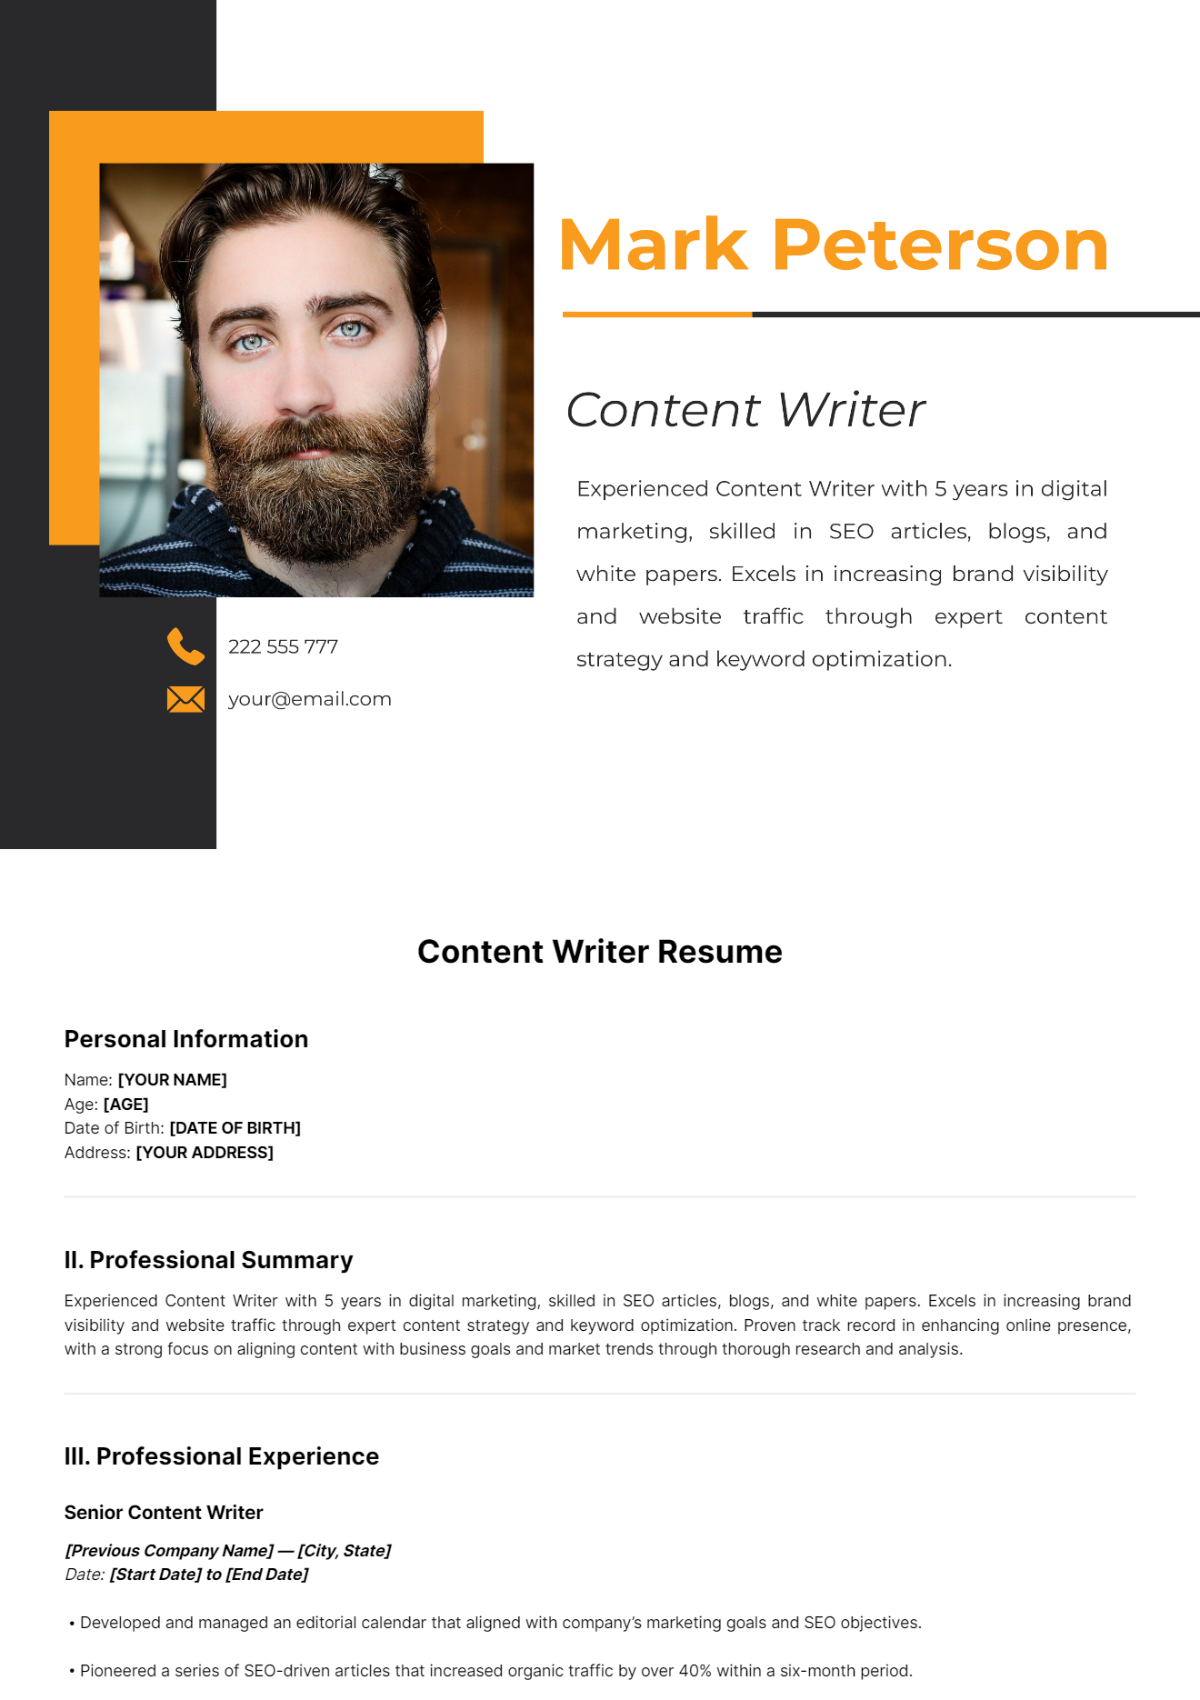 Content Writer Resume Template